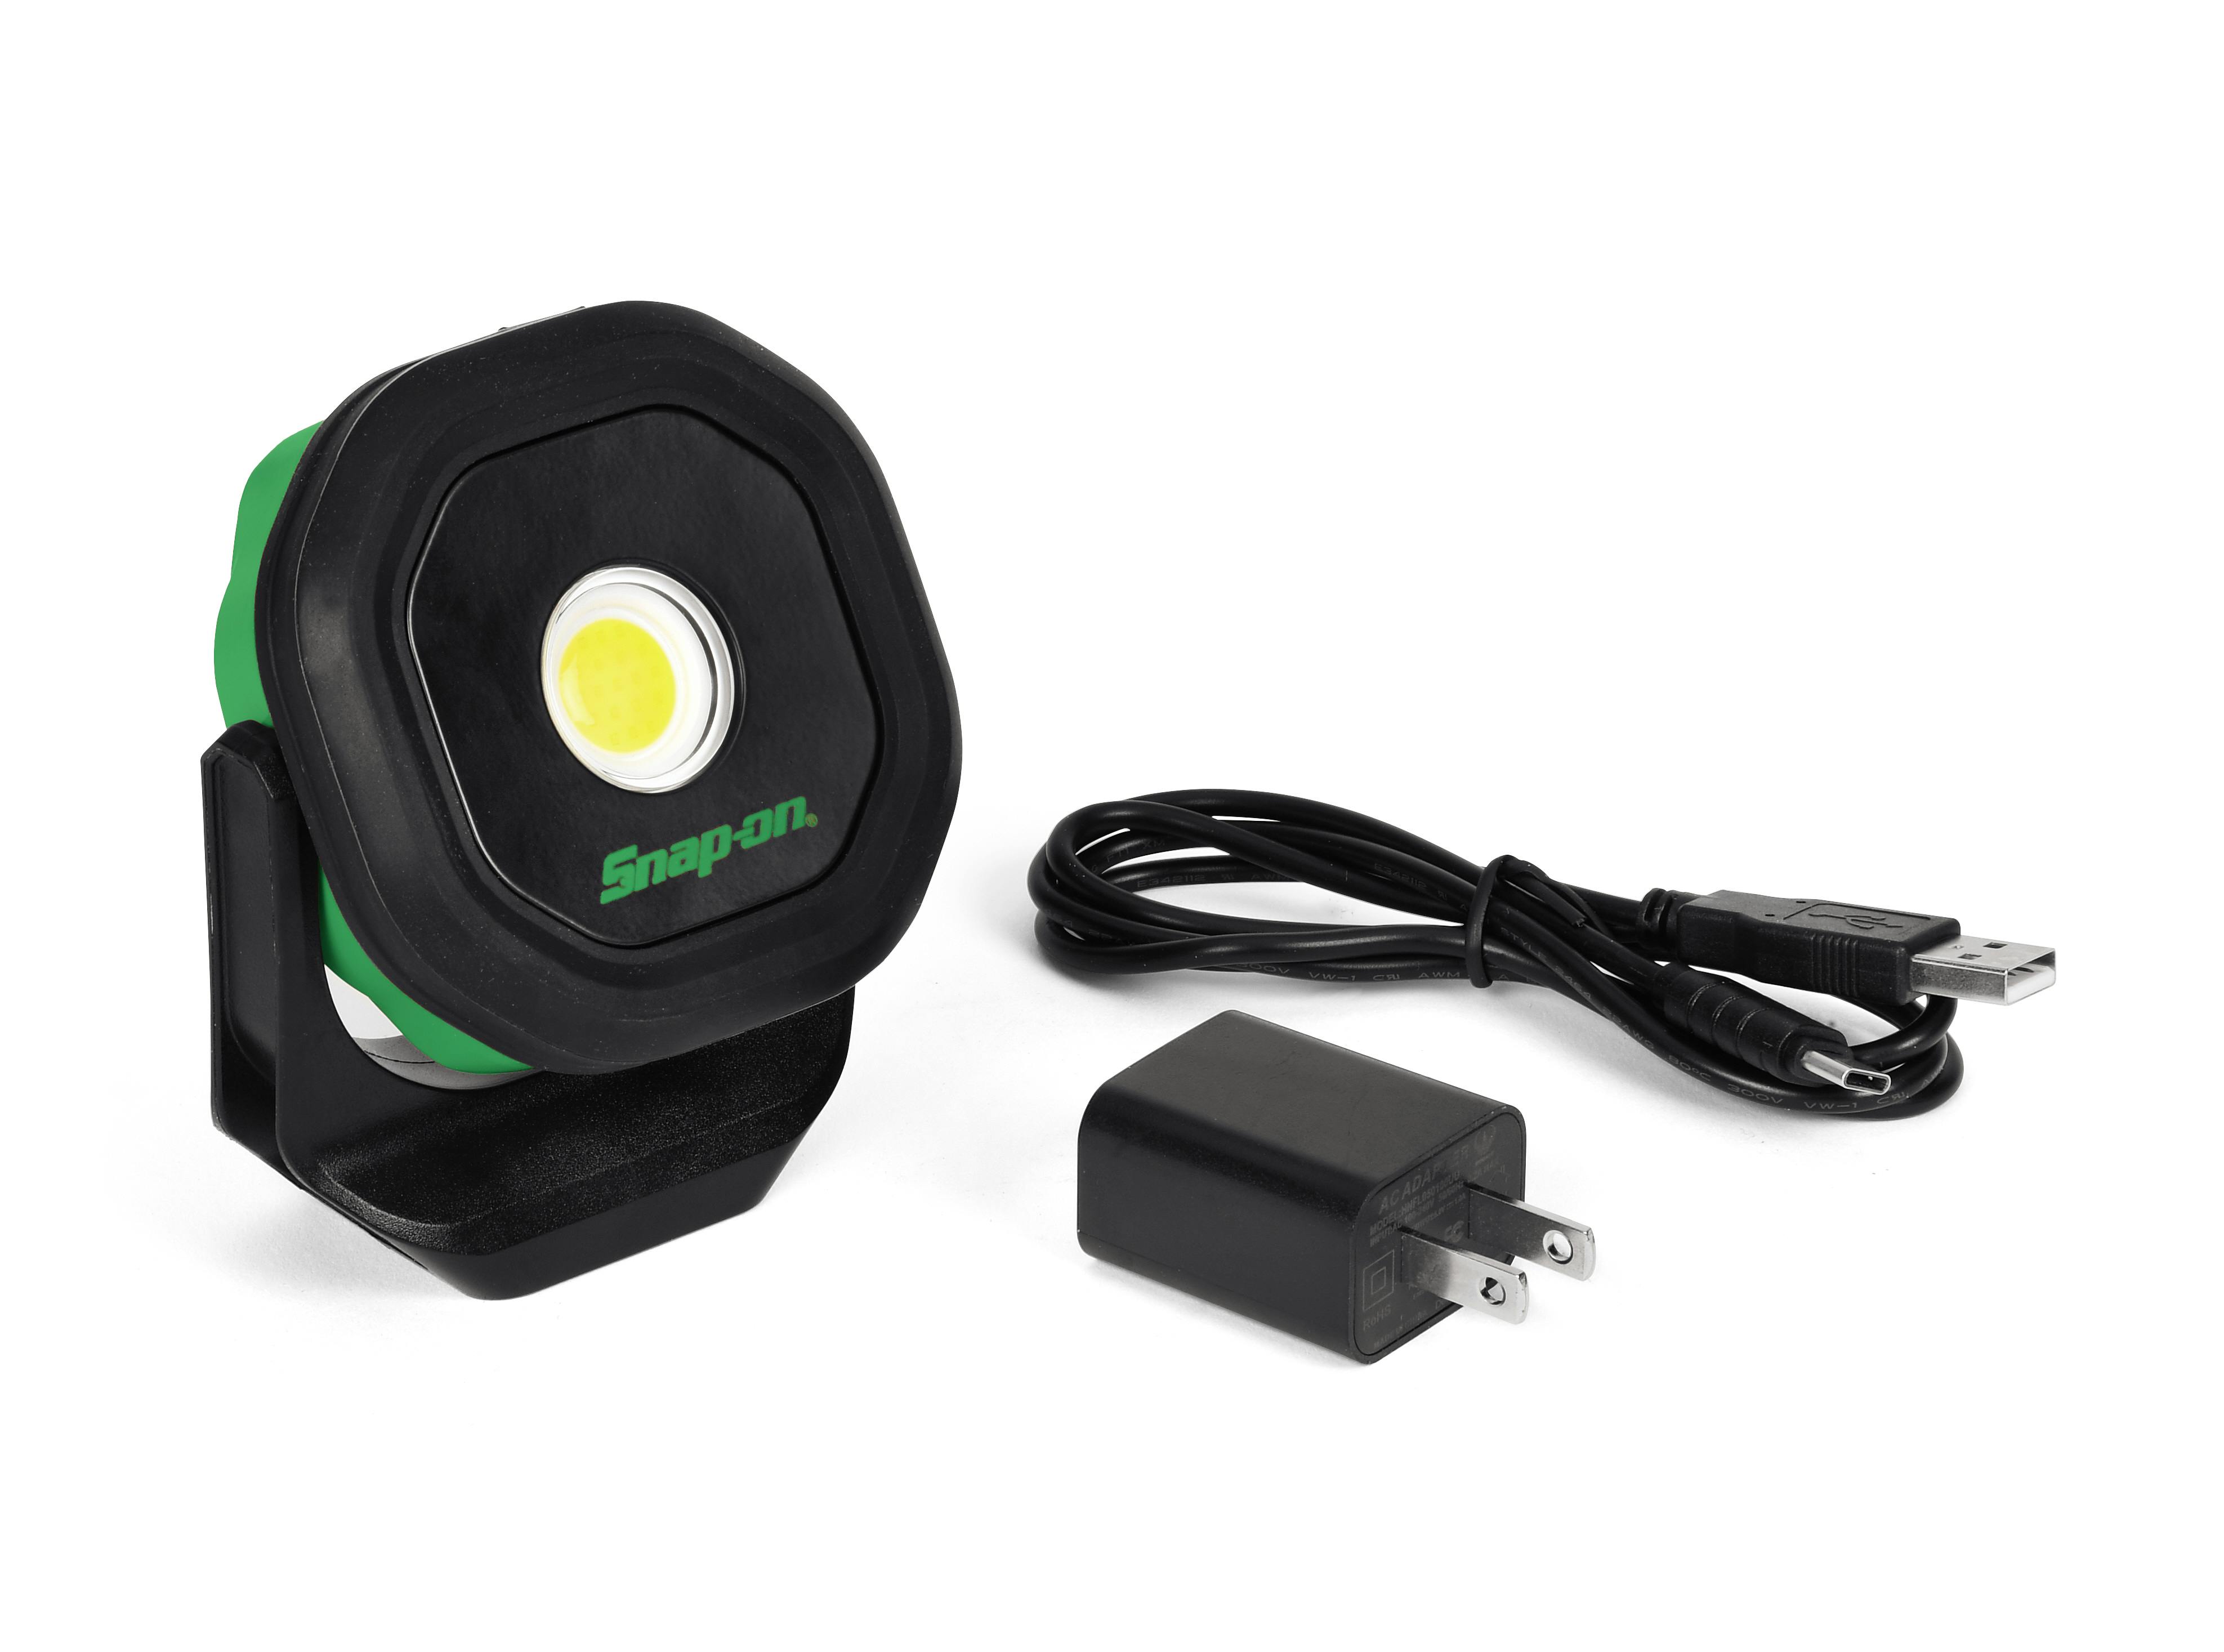 Green Snap-on 400 lumen Rechargeable Project Light